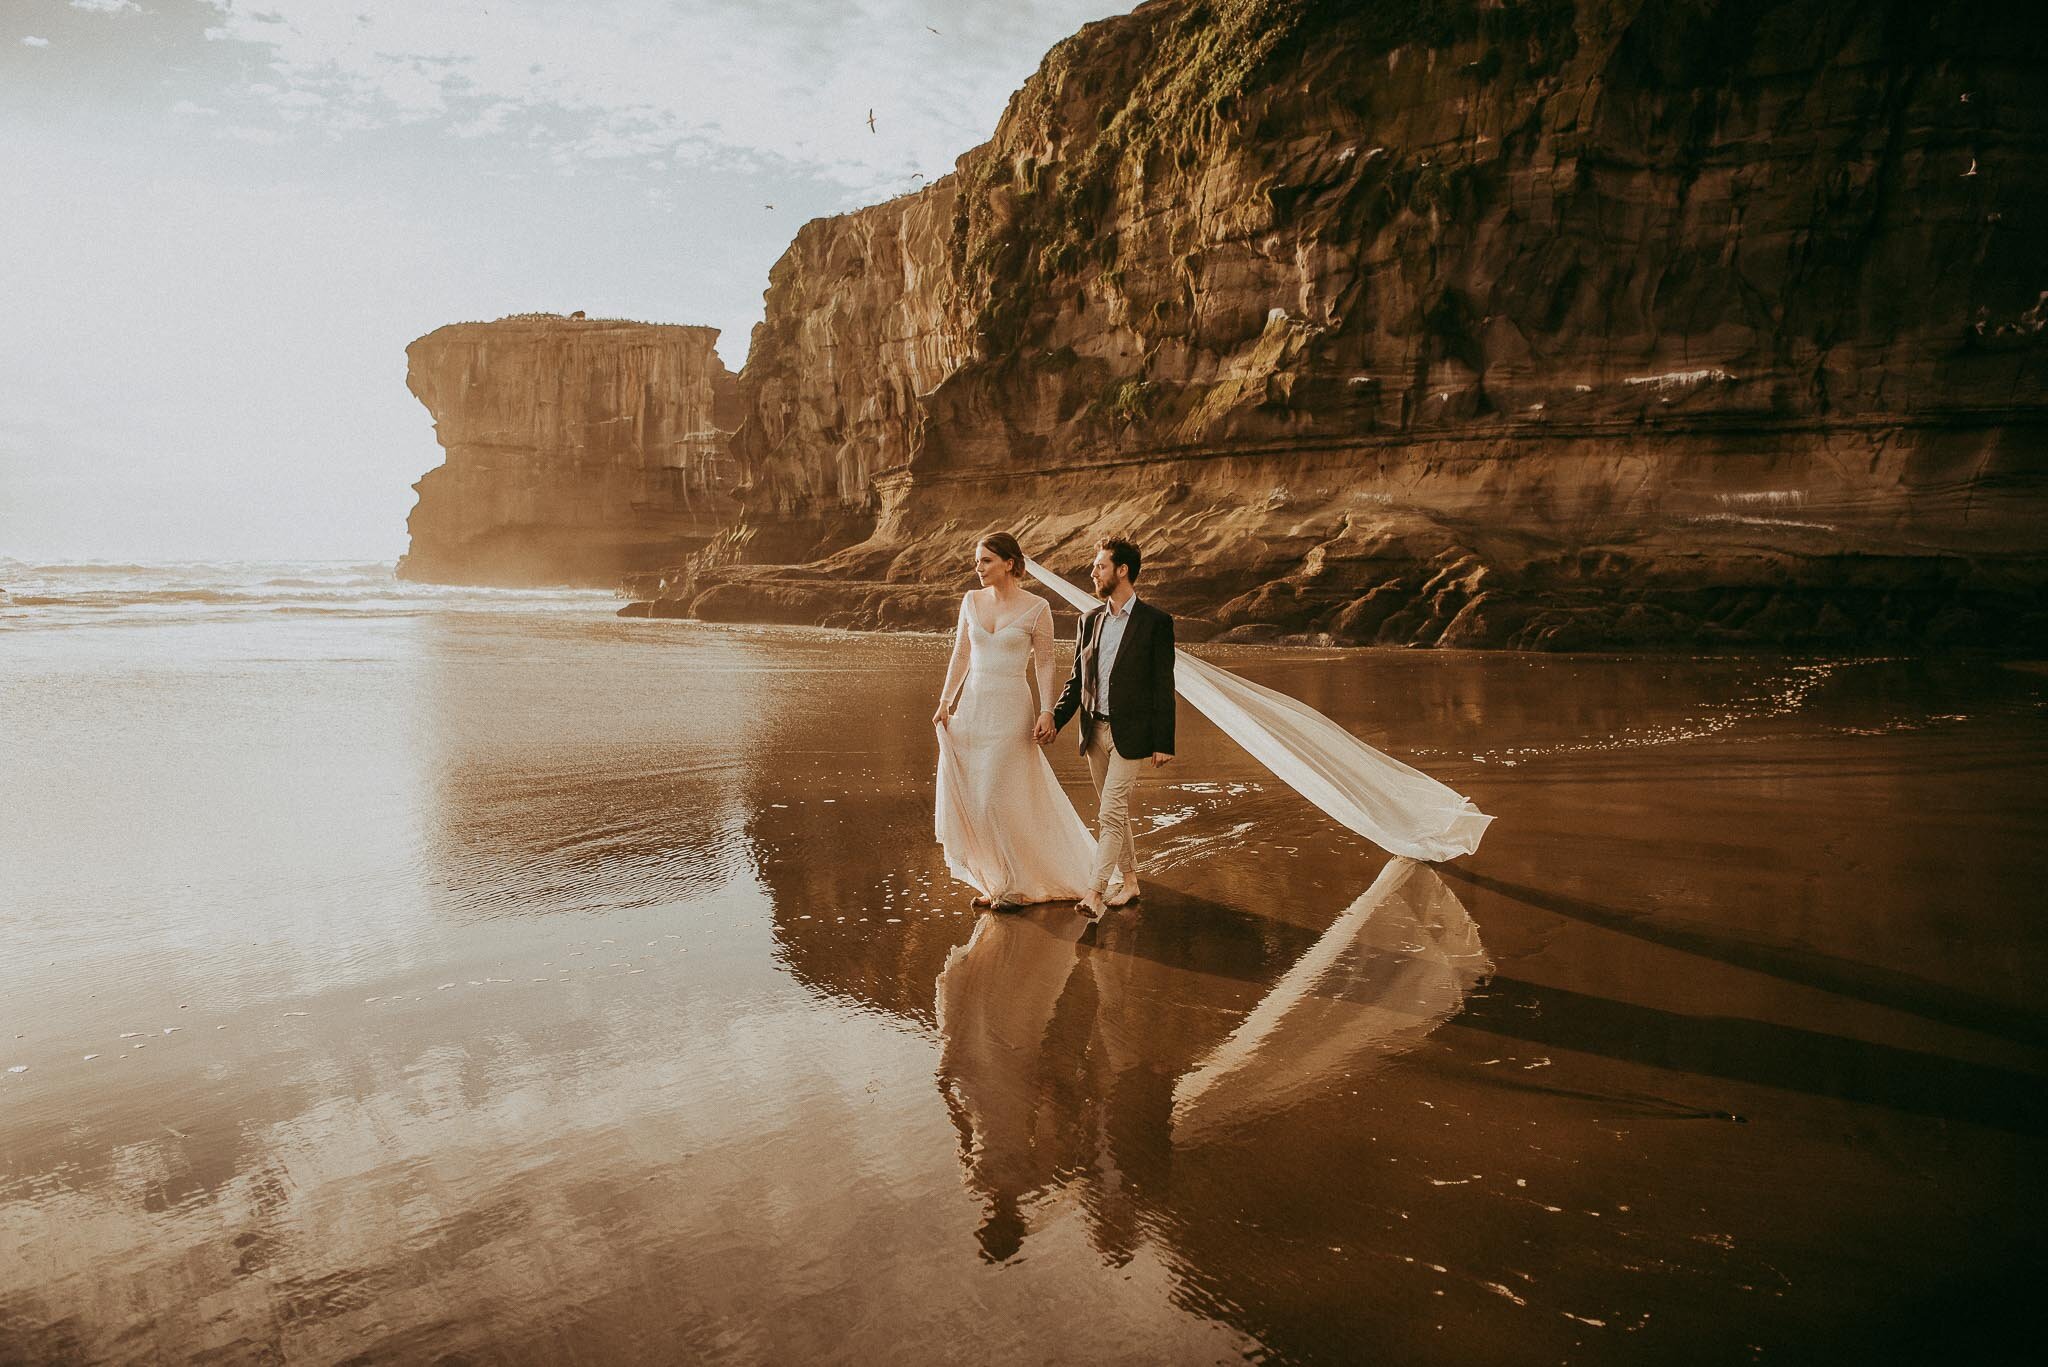 Workshop for photographers in Auckland done {New Zealand wedding photographer}